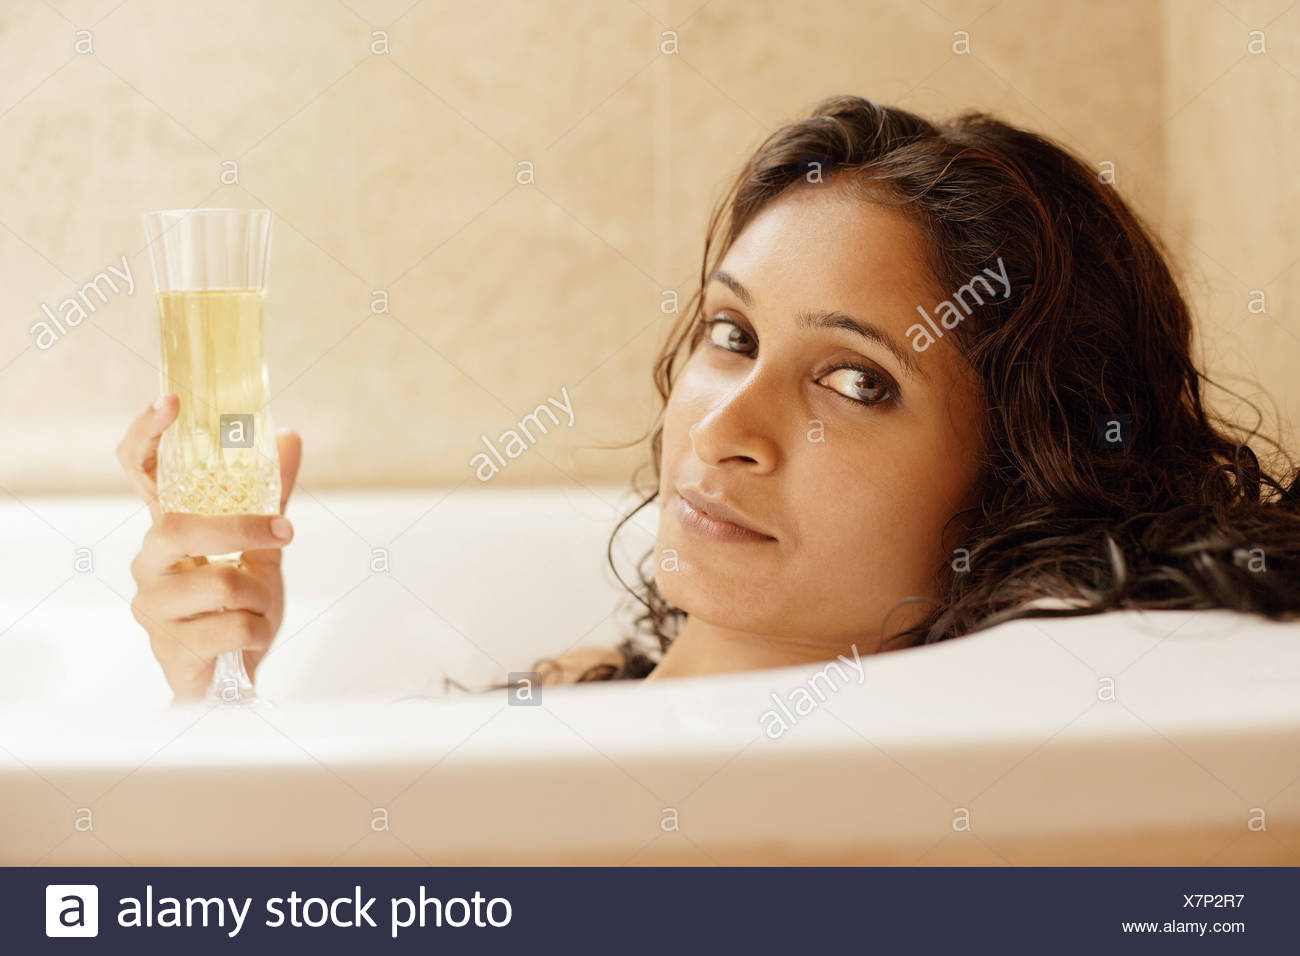 Woman In Bathtub Holding Champagne Glass Stock Photo